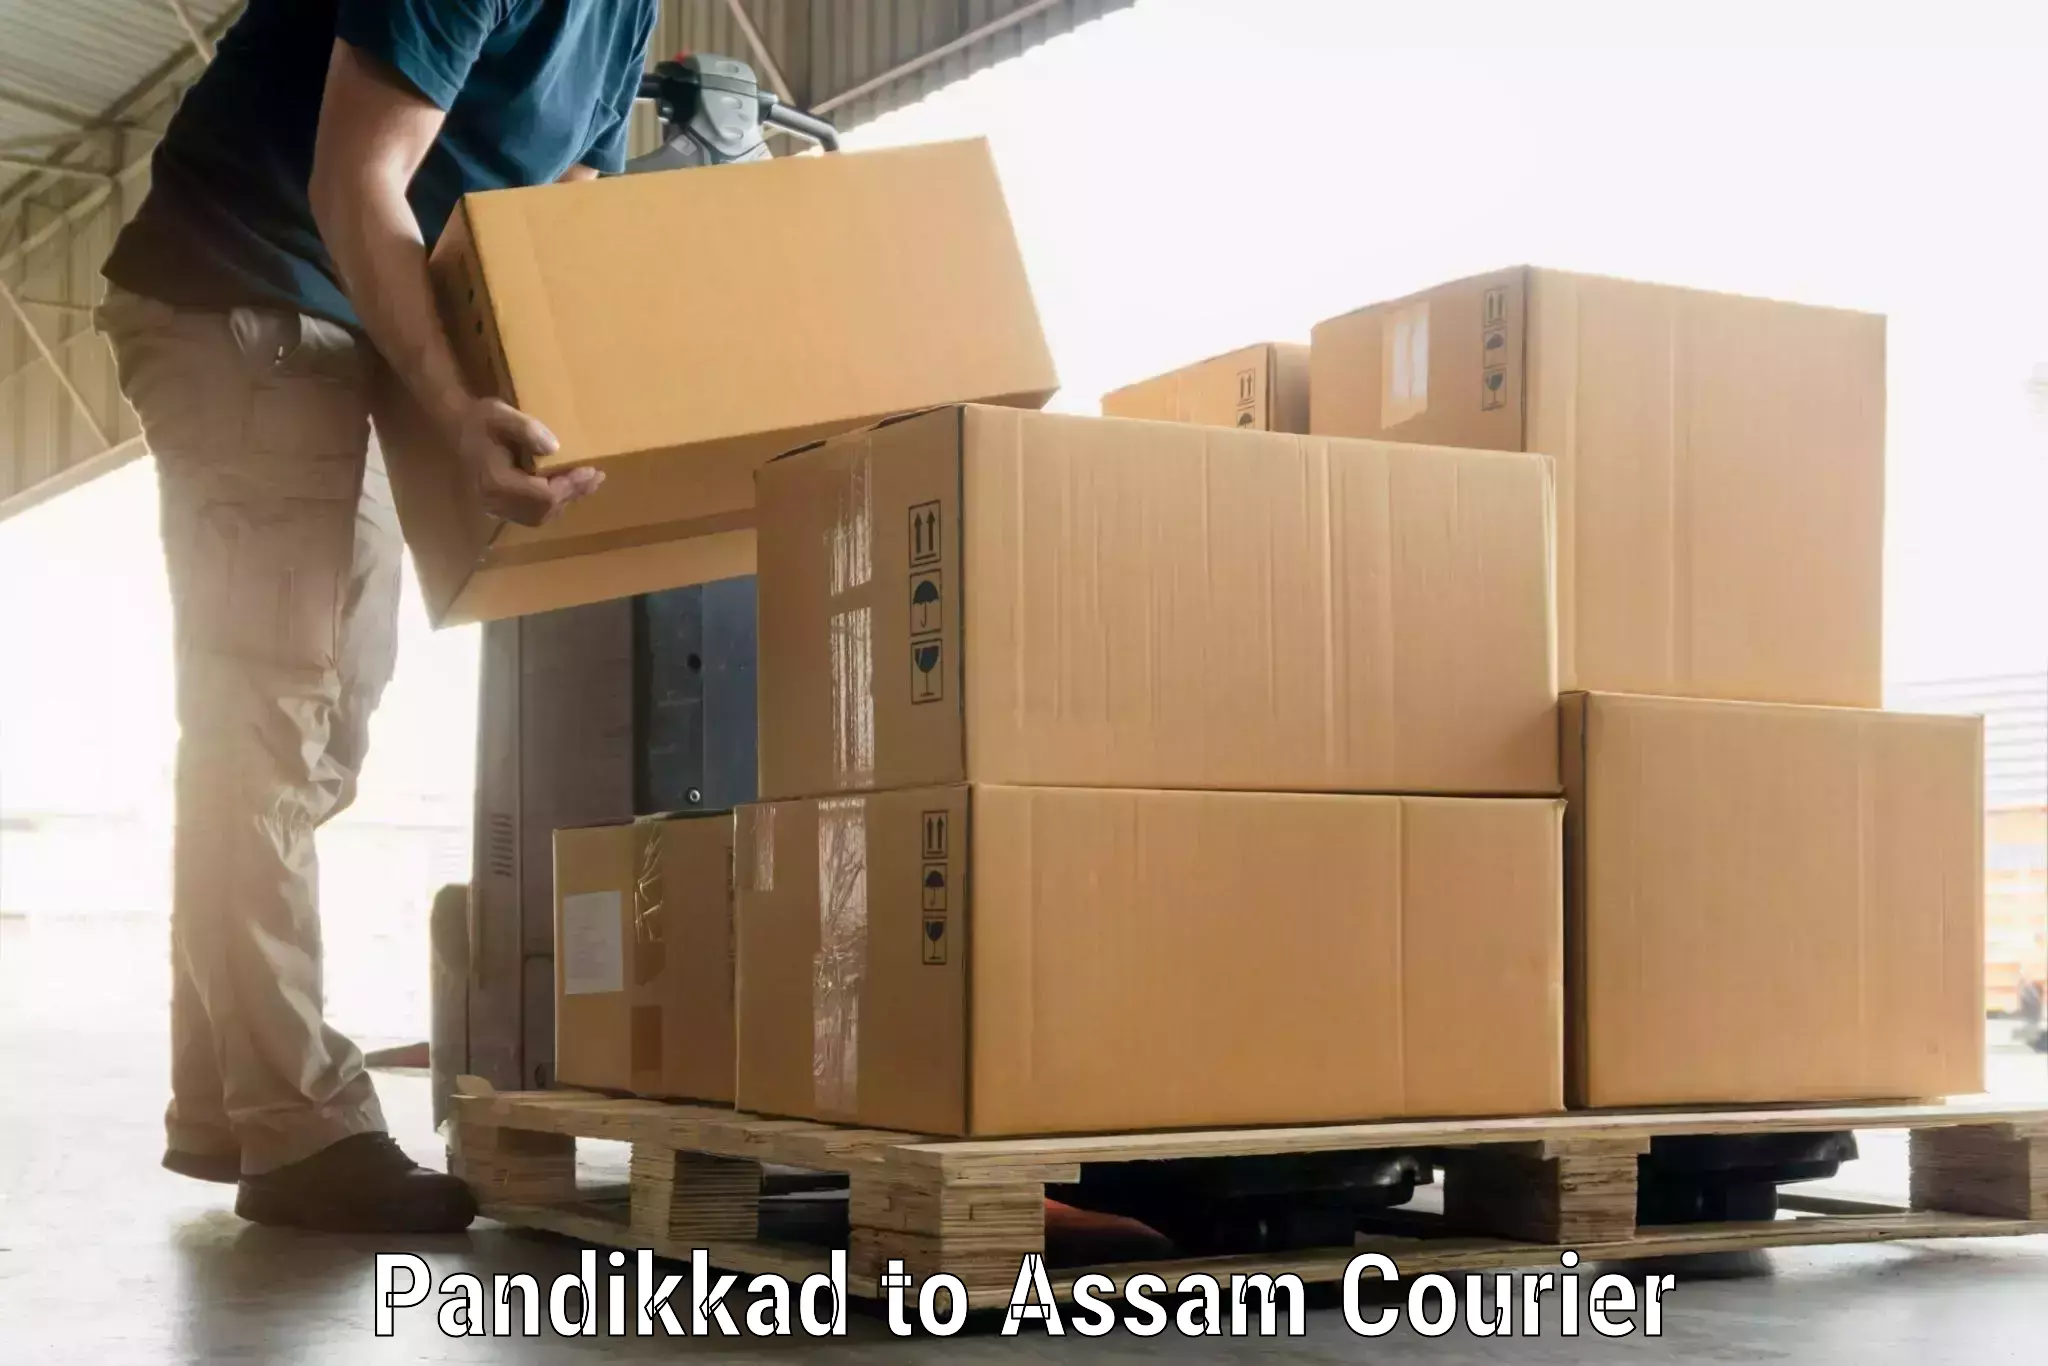 Luggage shipping specialists Pandikkad to Assam